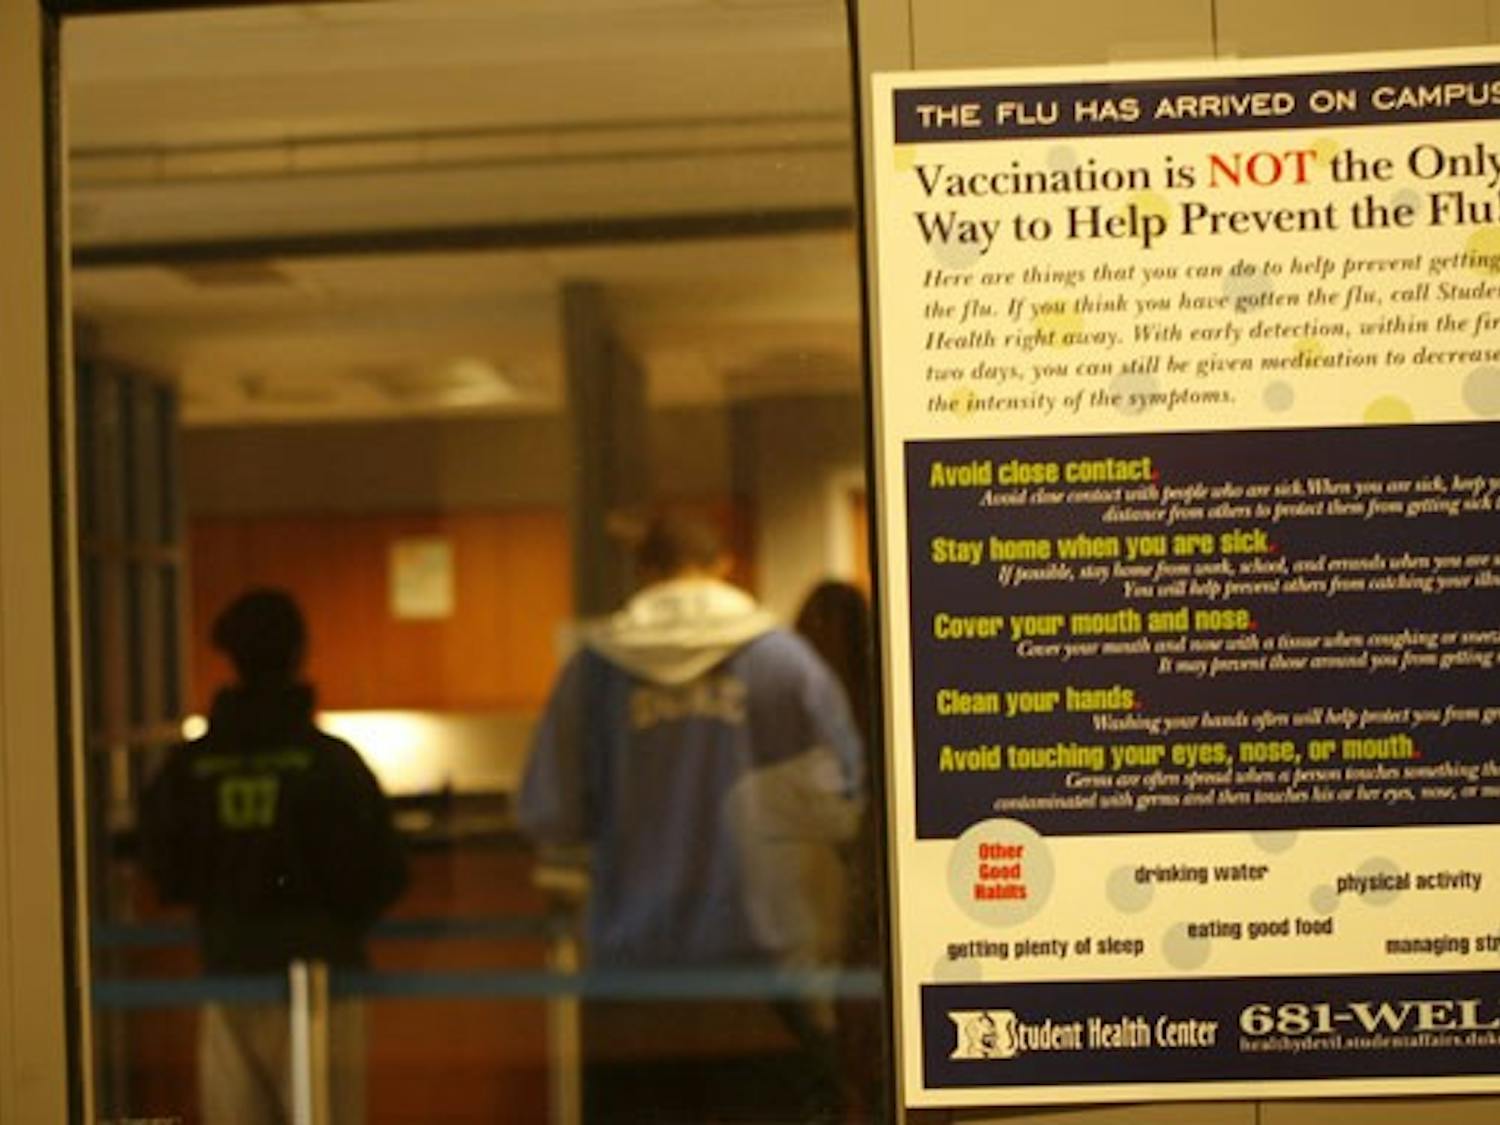 A sign outside the Student Health Center informs visitors of alternative ways to prevent contracting swine flu without receiving vaccination.